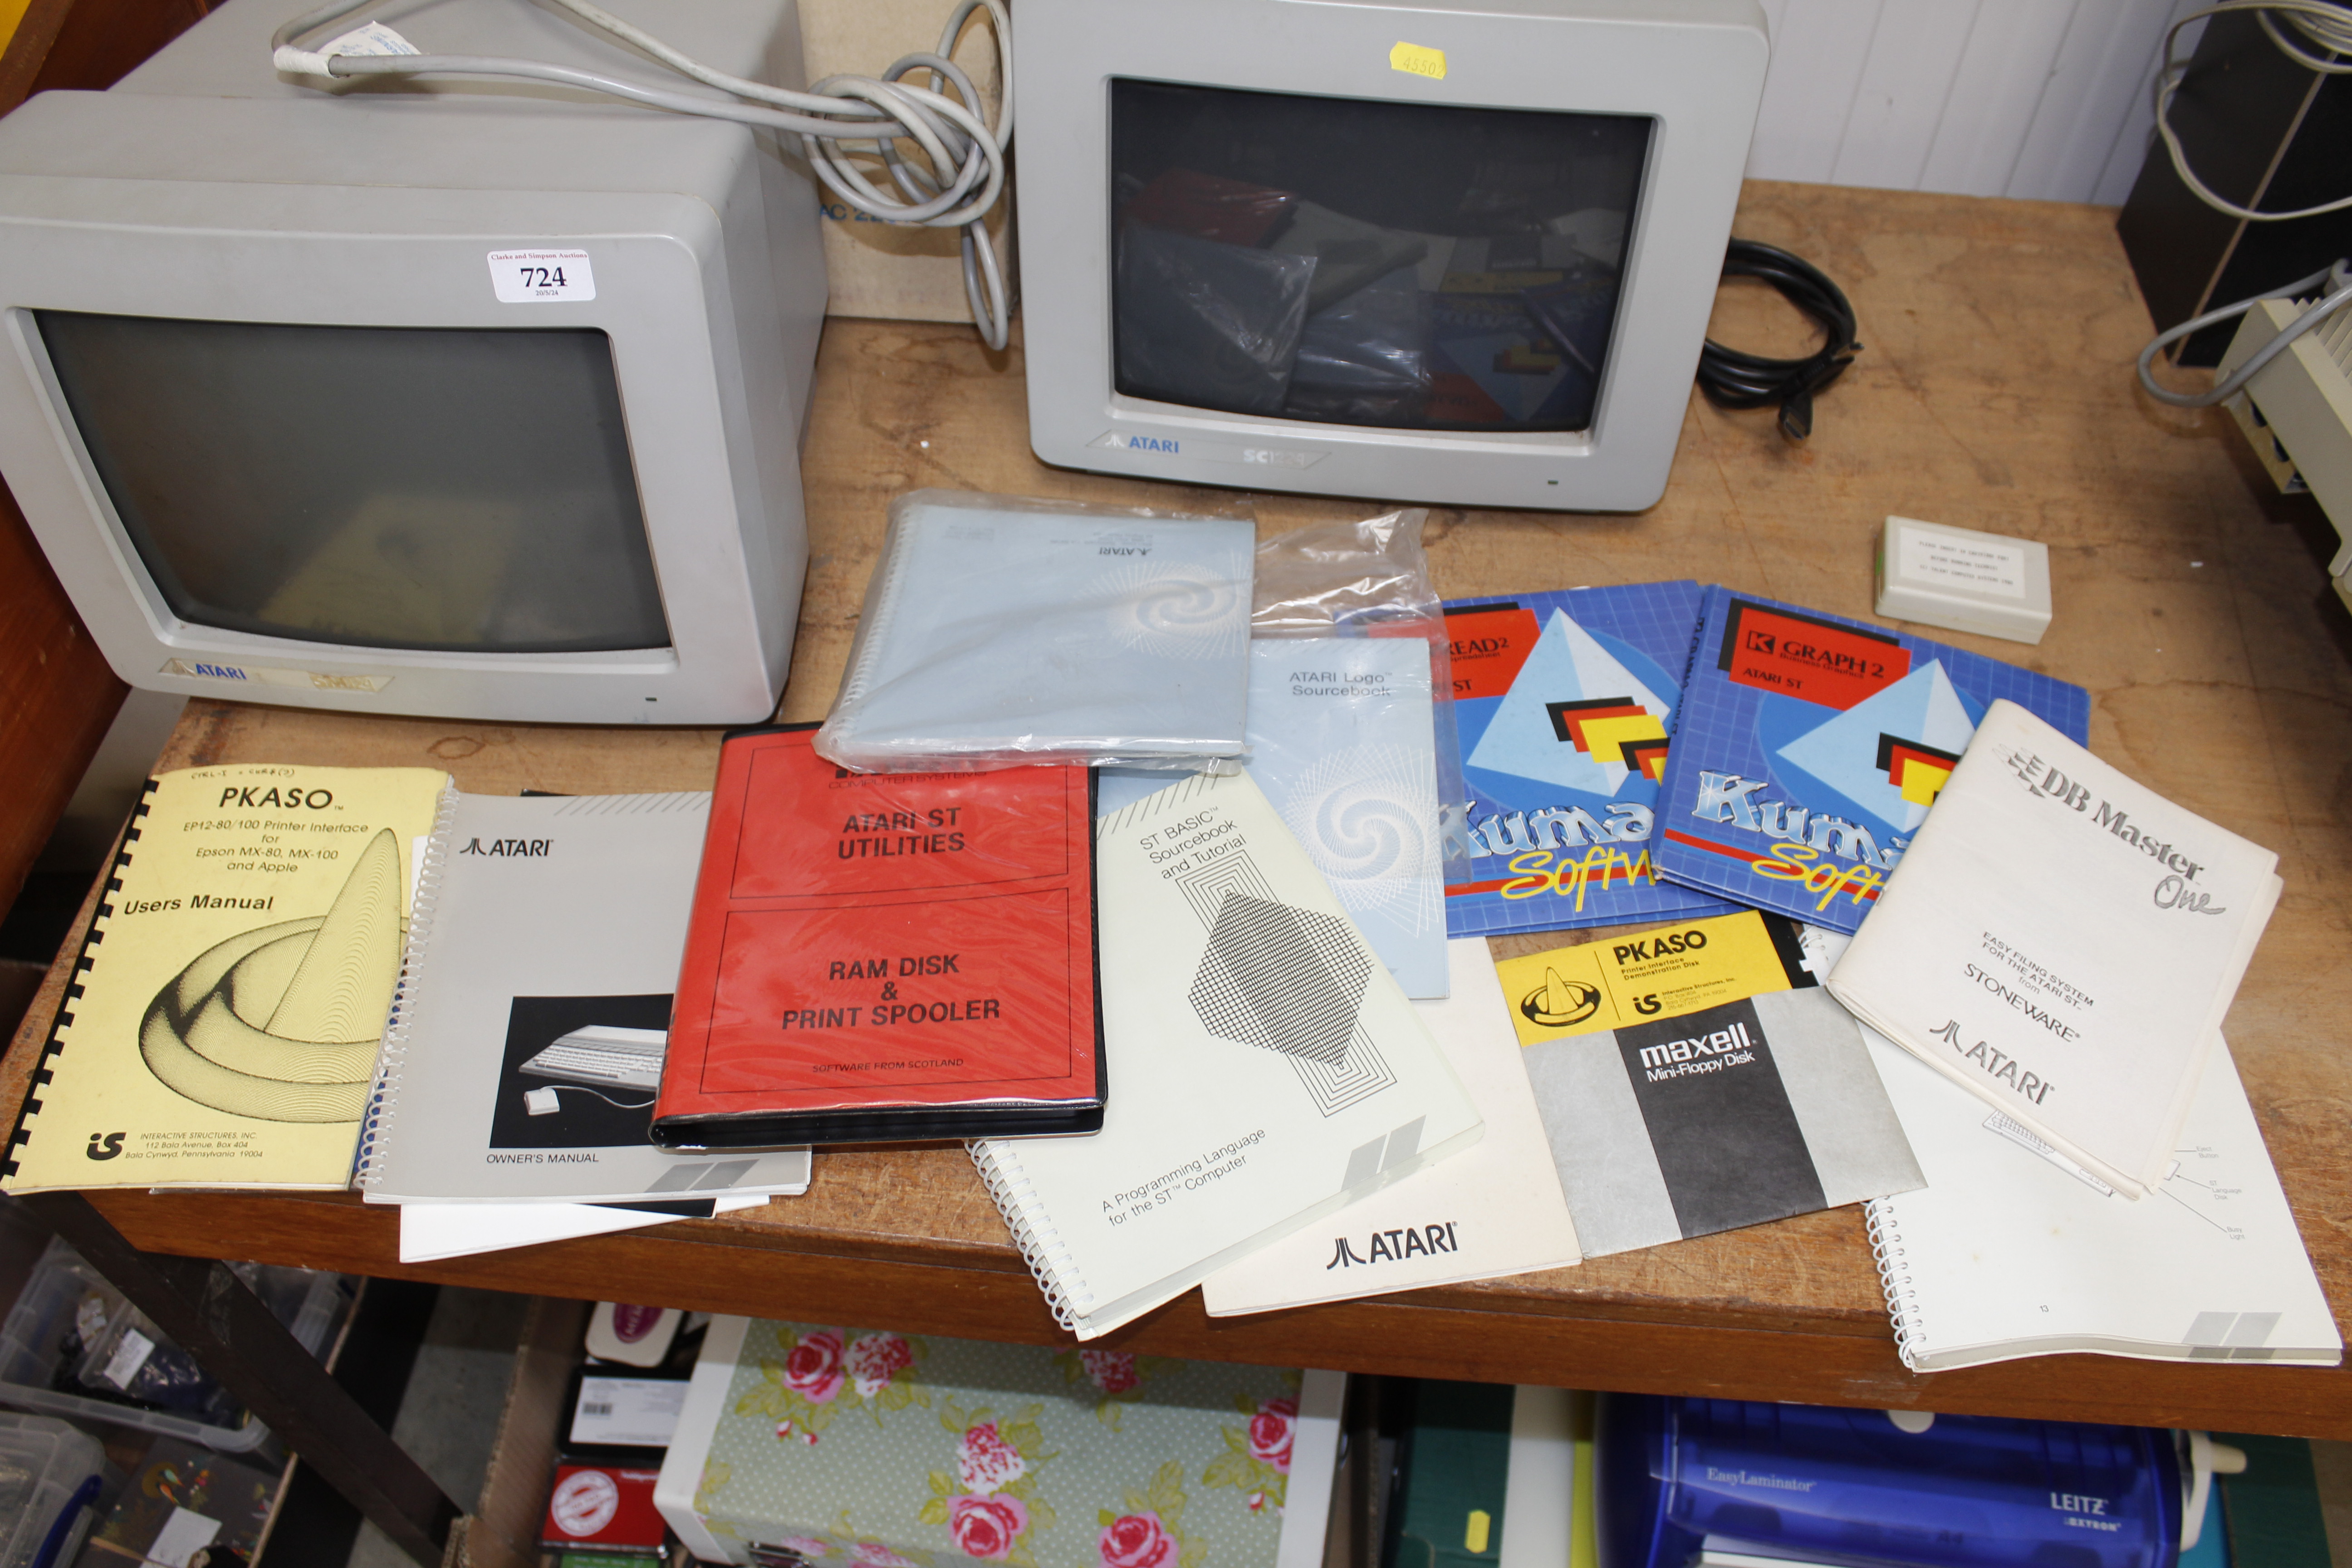 An Atari 1040STF computer with two monitors, boxes and manuals etc. - Image 8 of 8